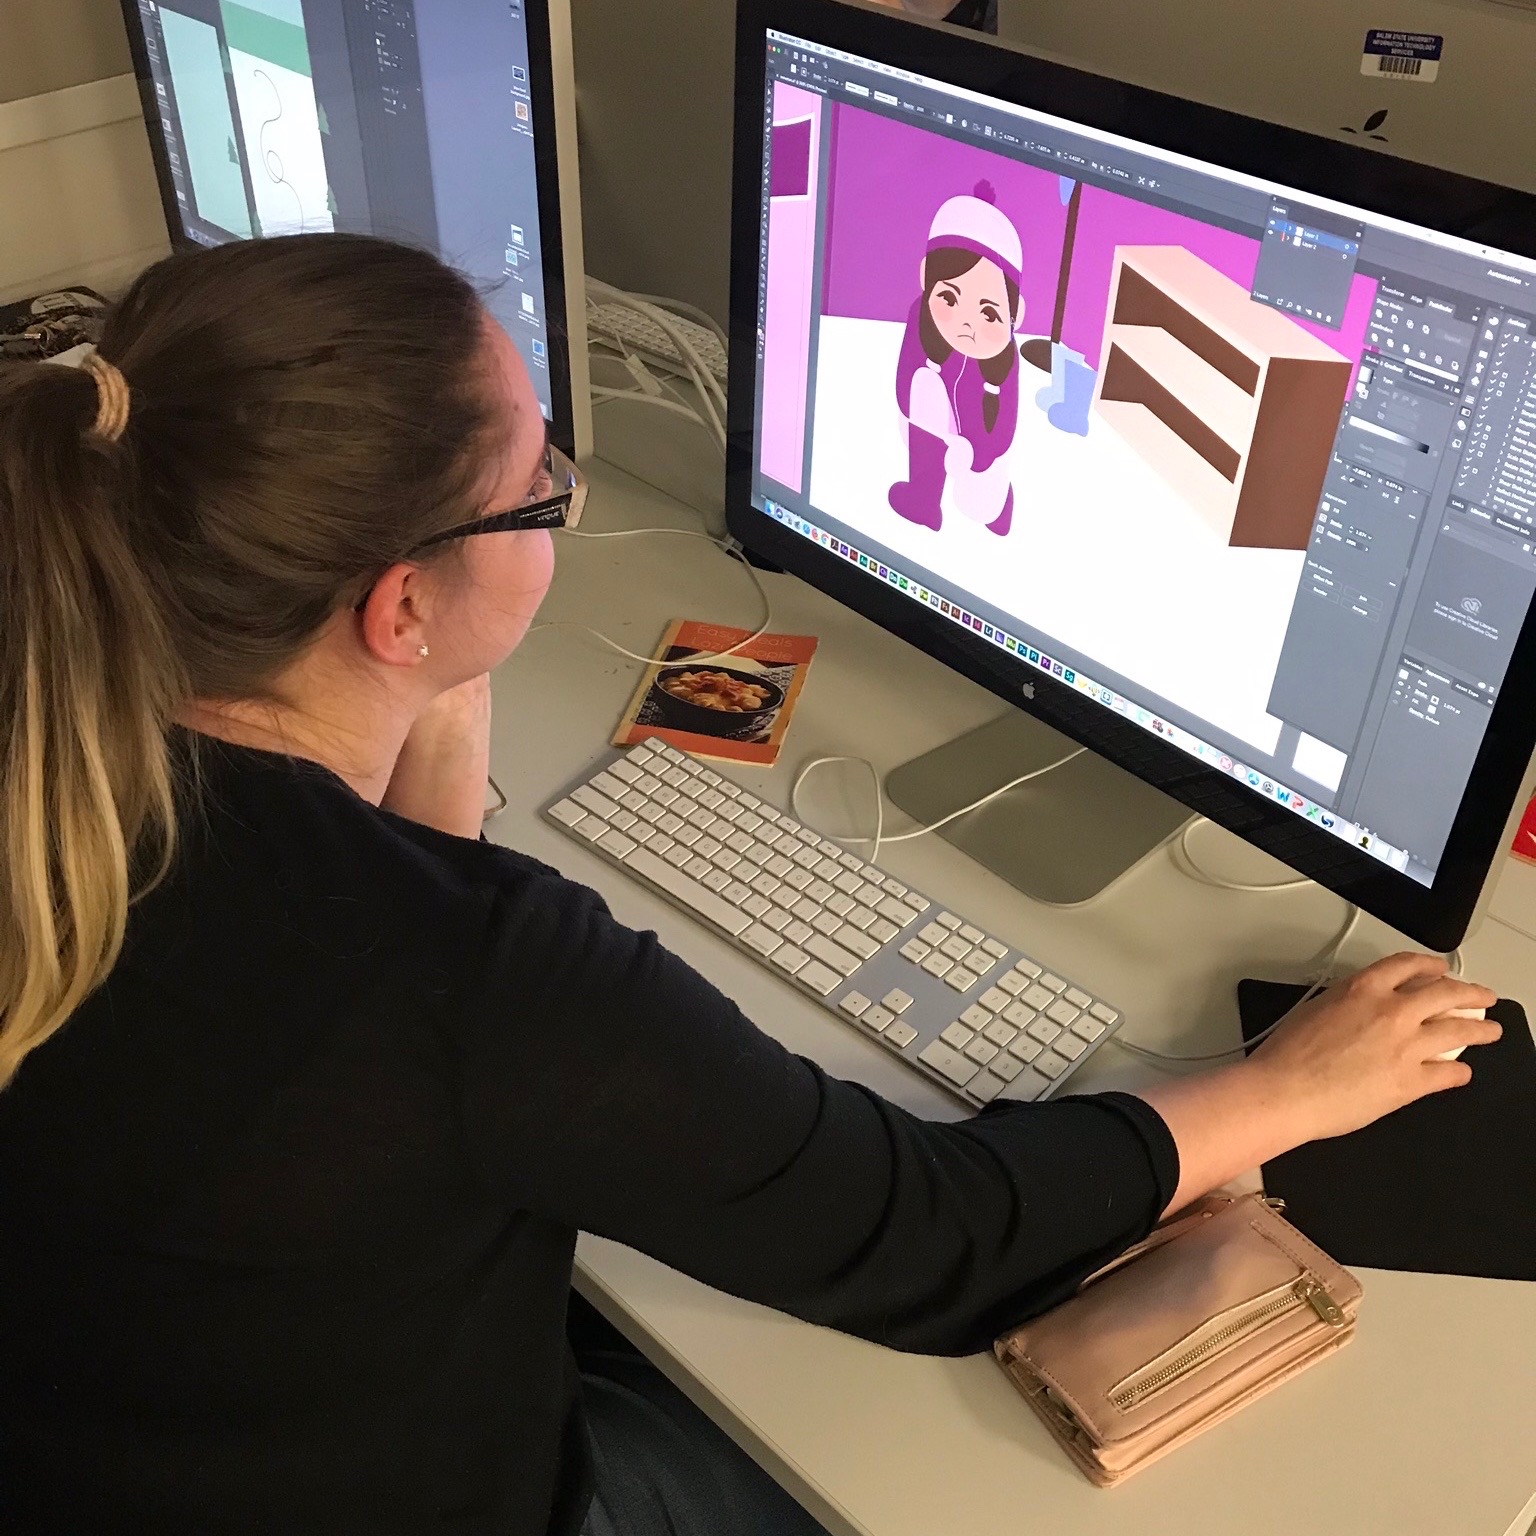 An art + design student works at graphic design on a computer.